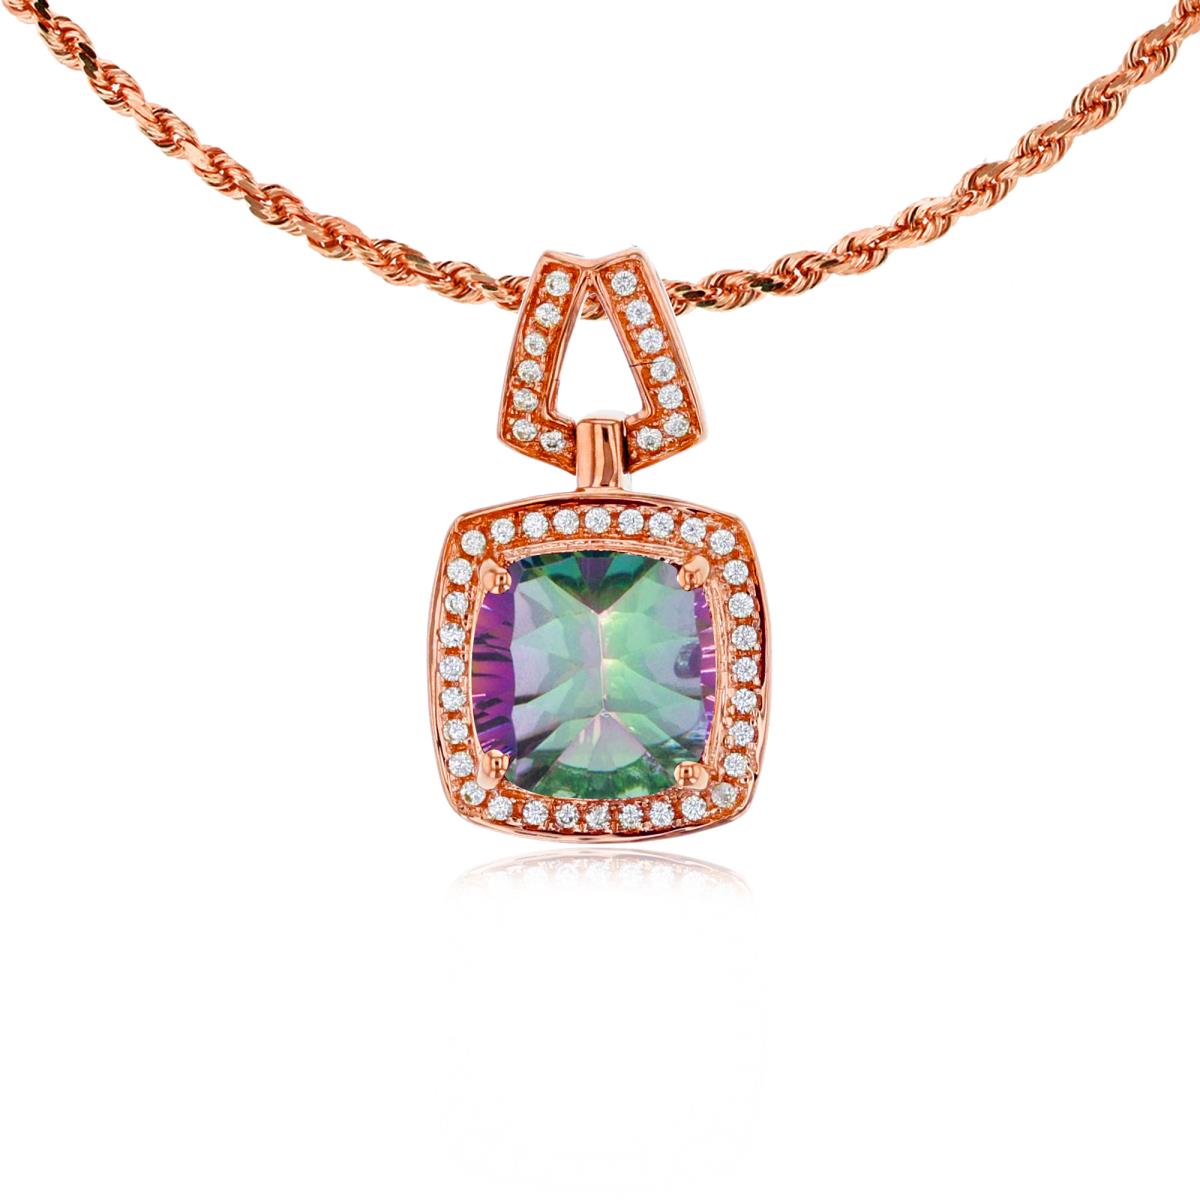 10K Rose Gold 7mm Cushion Mystic Green Topaz & 0.10 CTTW Diamond Halo 18" Rope Chain Necklace